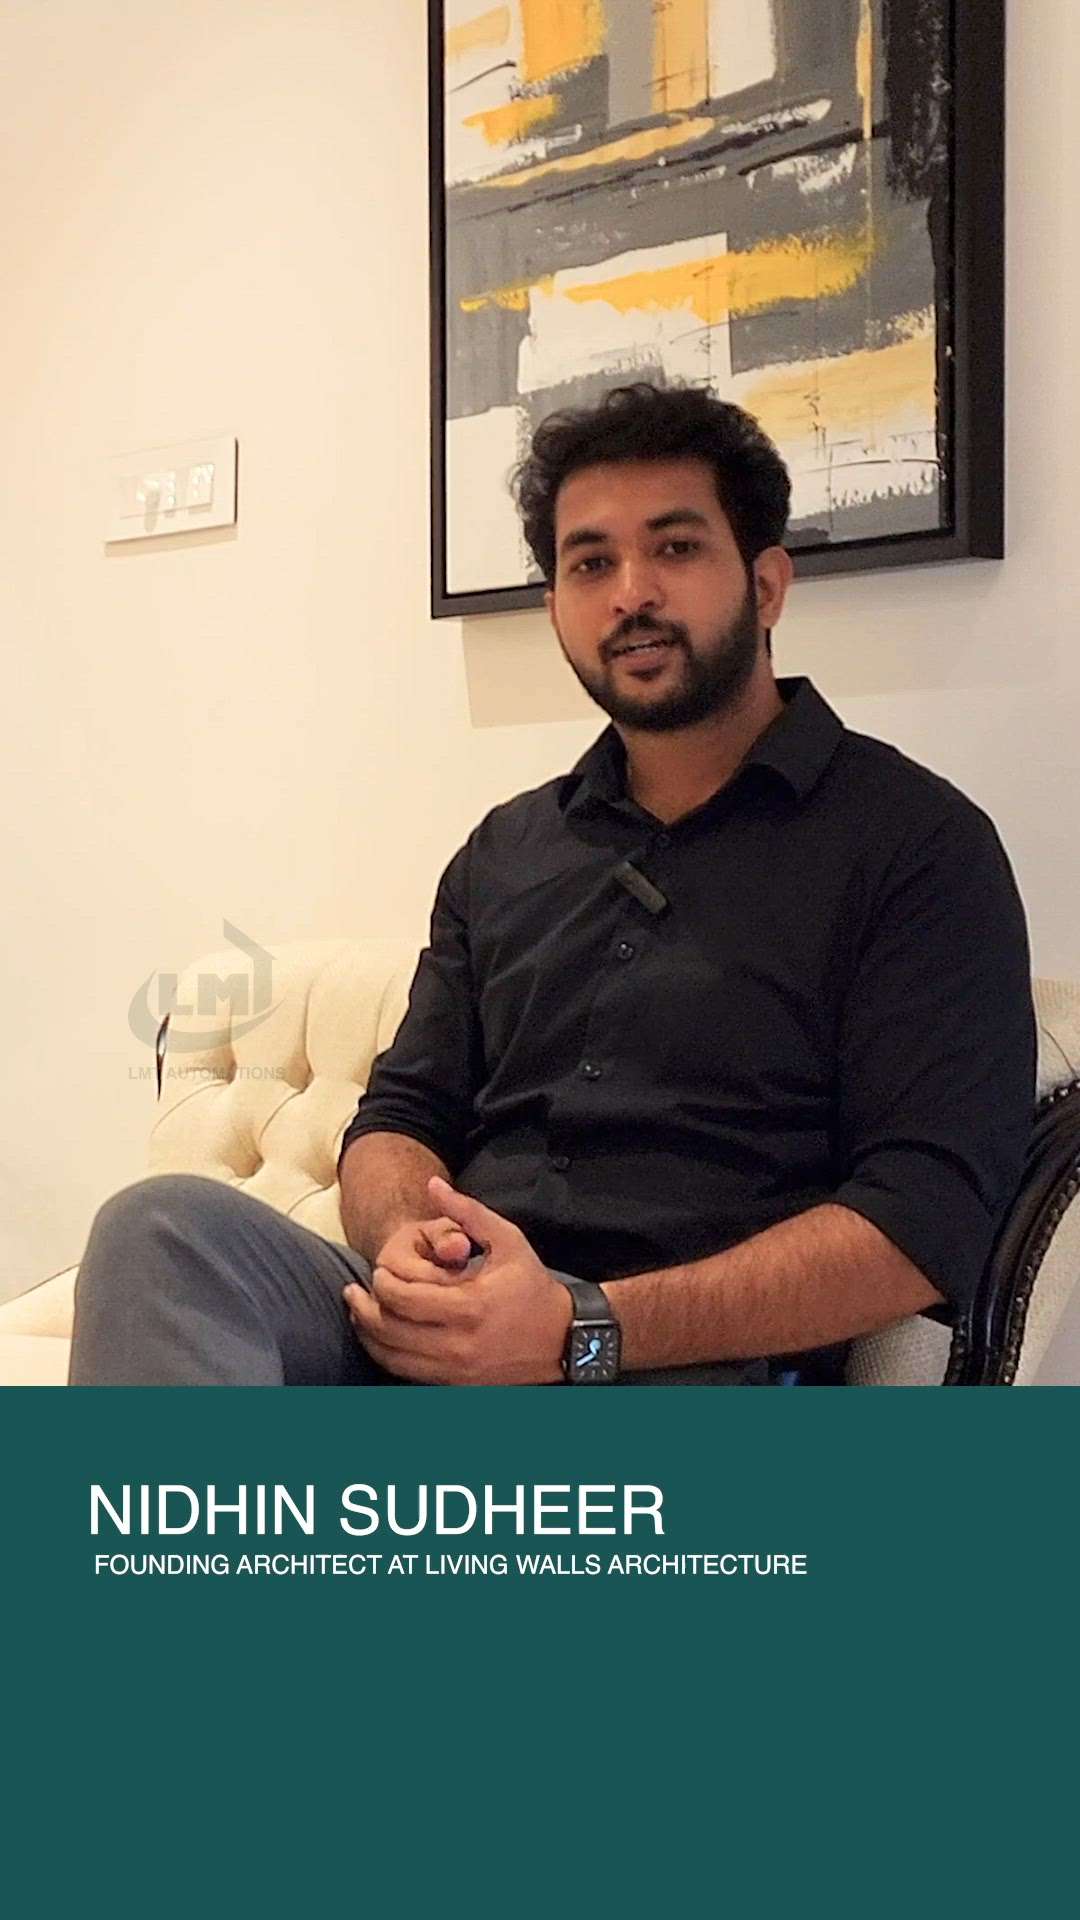 Nithin Sudheer from Living Wall Architect shares his experience using the Alutech shutter from LMT. He highlights the numerous benefits he has experienced since incorporating it into his latest  projects.
Also mentioning the exceptional performance of other products offered by LMT, including the Spyro shutter for Garage and the Raino Sliding gate automation system
 #homeautomation
 #automaticshutter #automaticgate